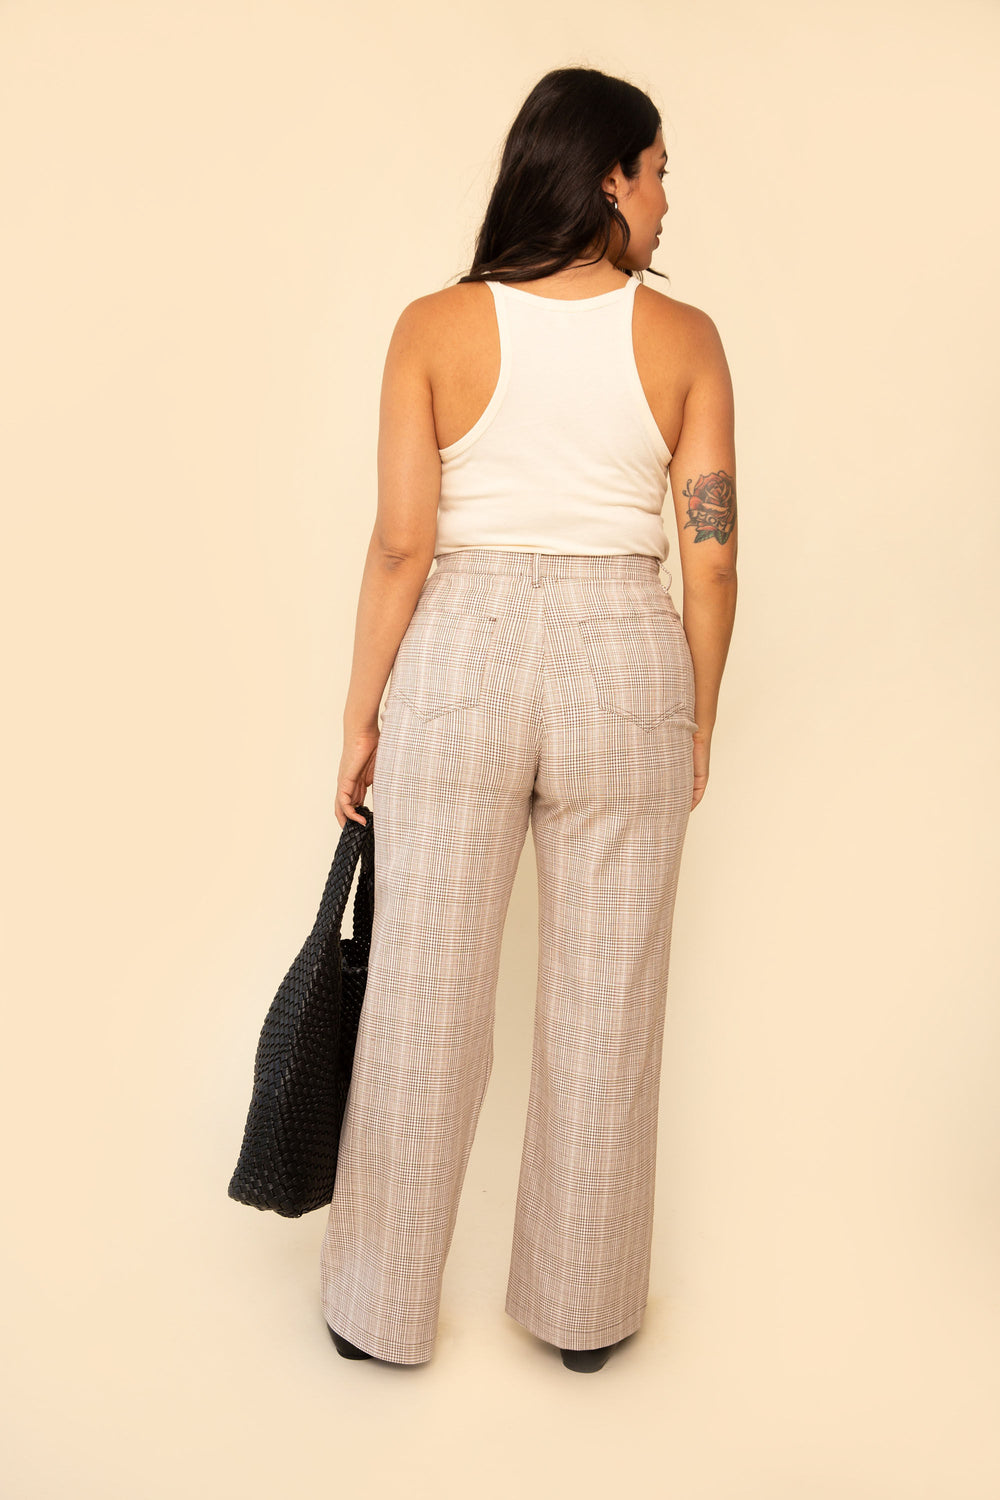 Flora Pant in Beige Plaid - Whimsy & Row